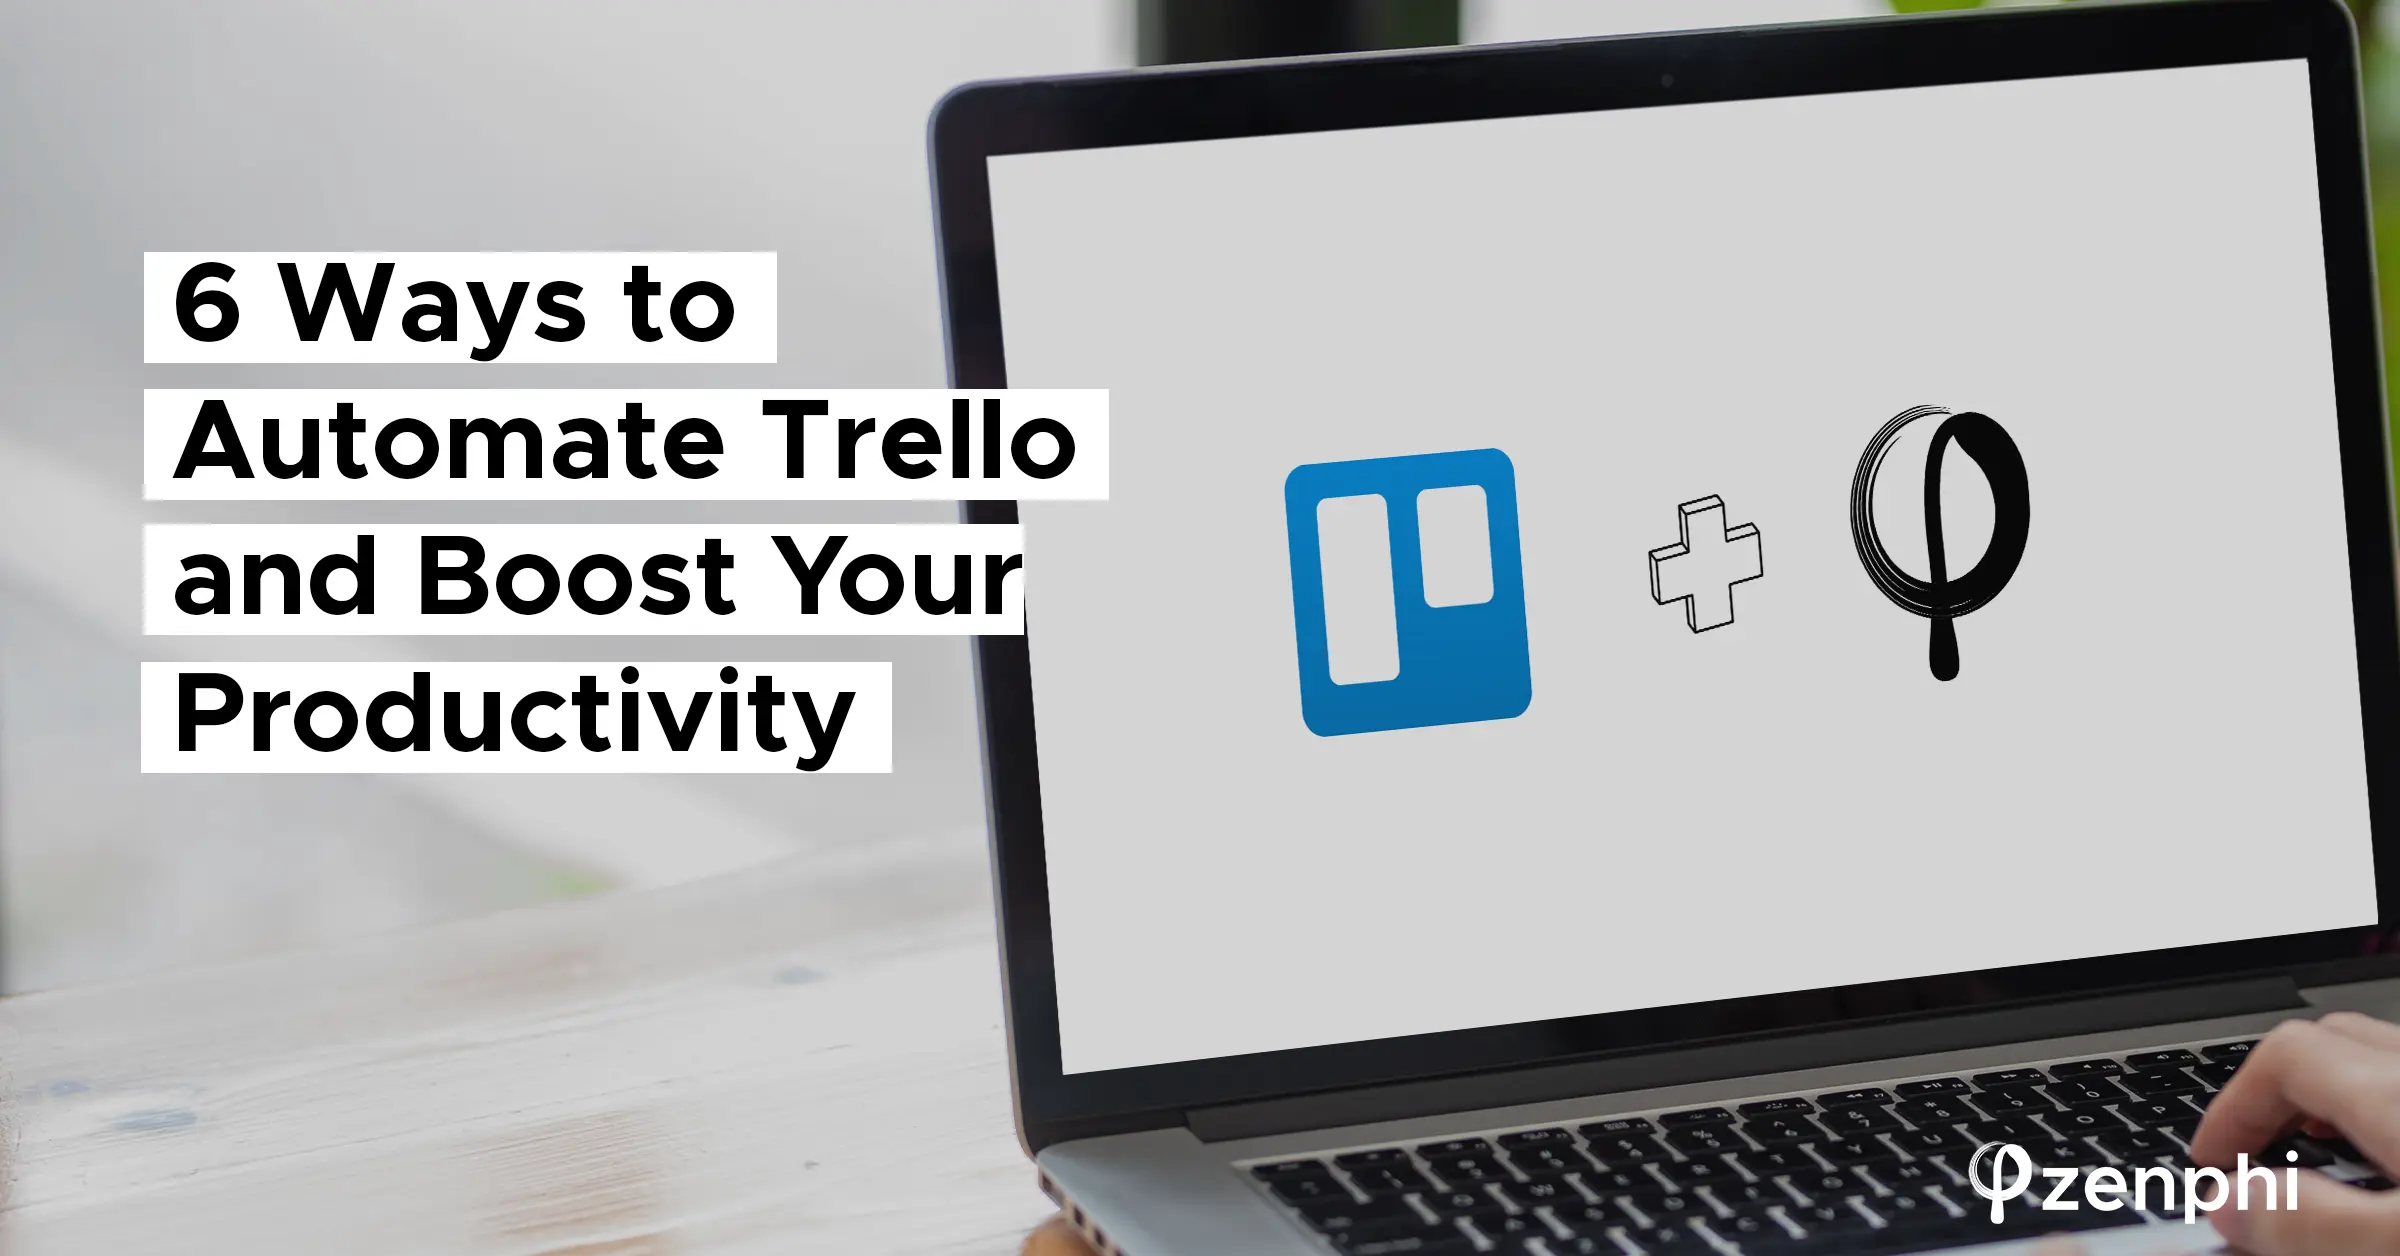 Introducing our 2-way Gmail to Trello integration